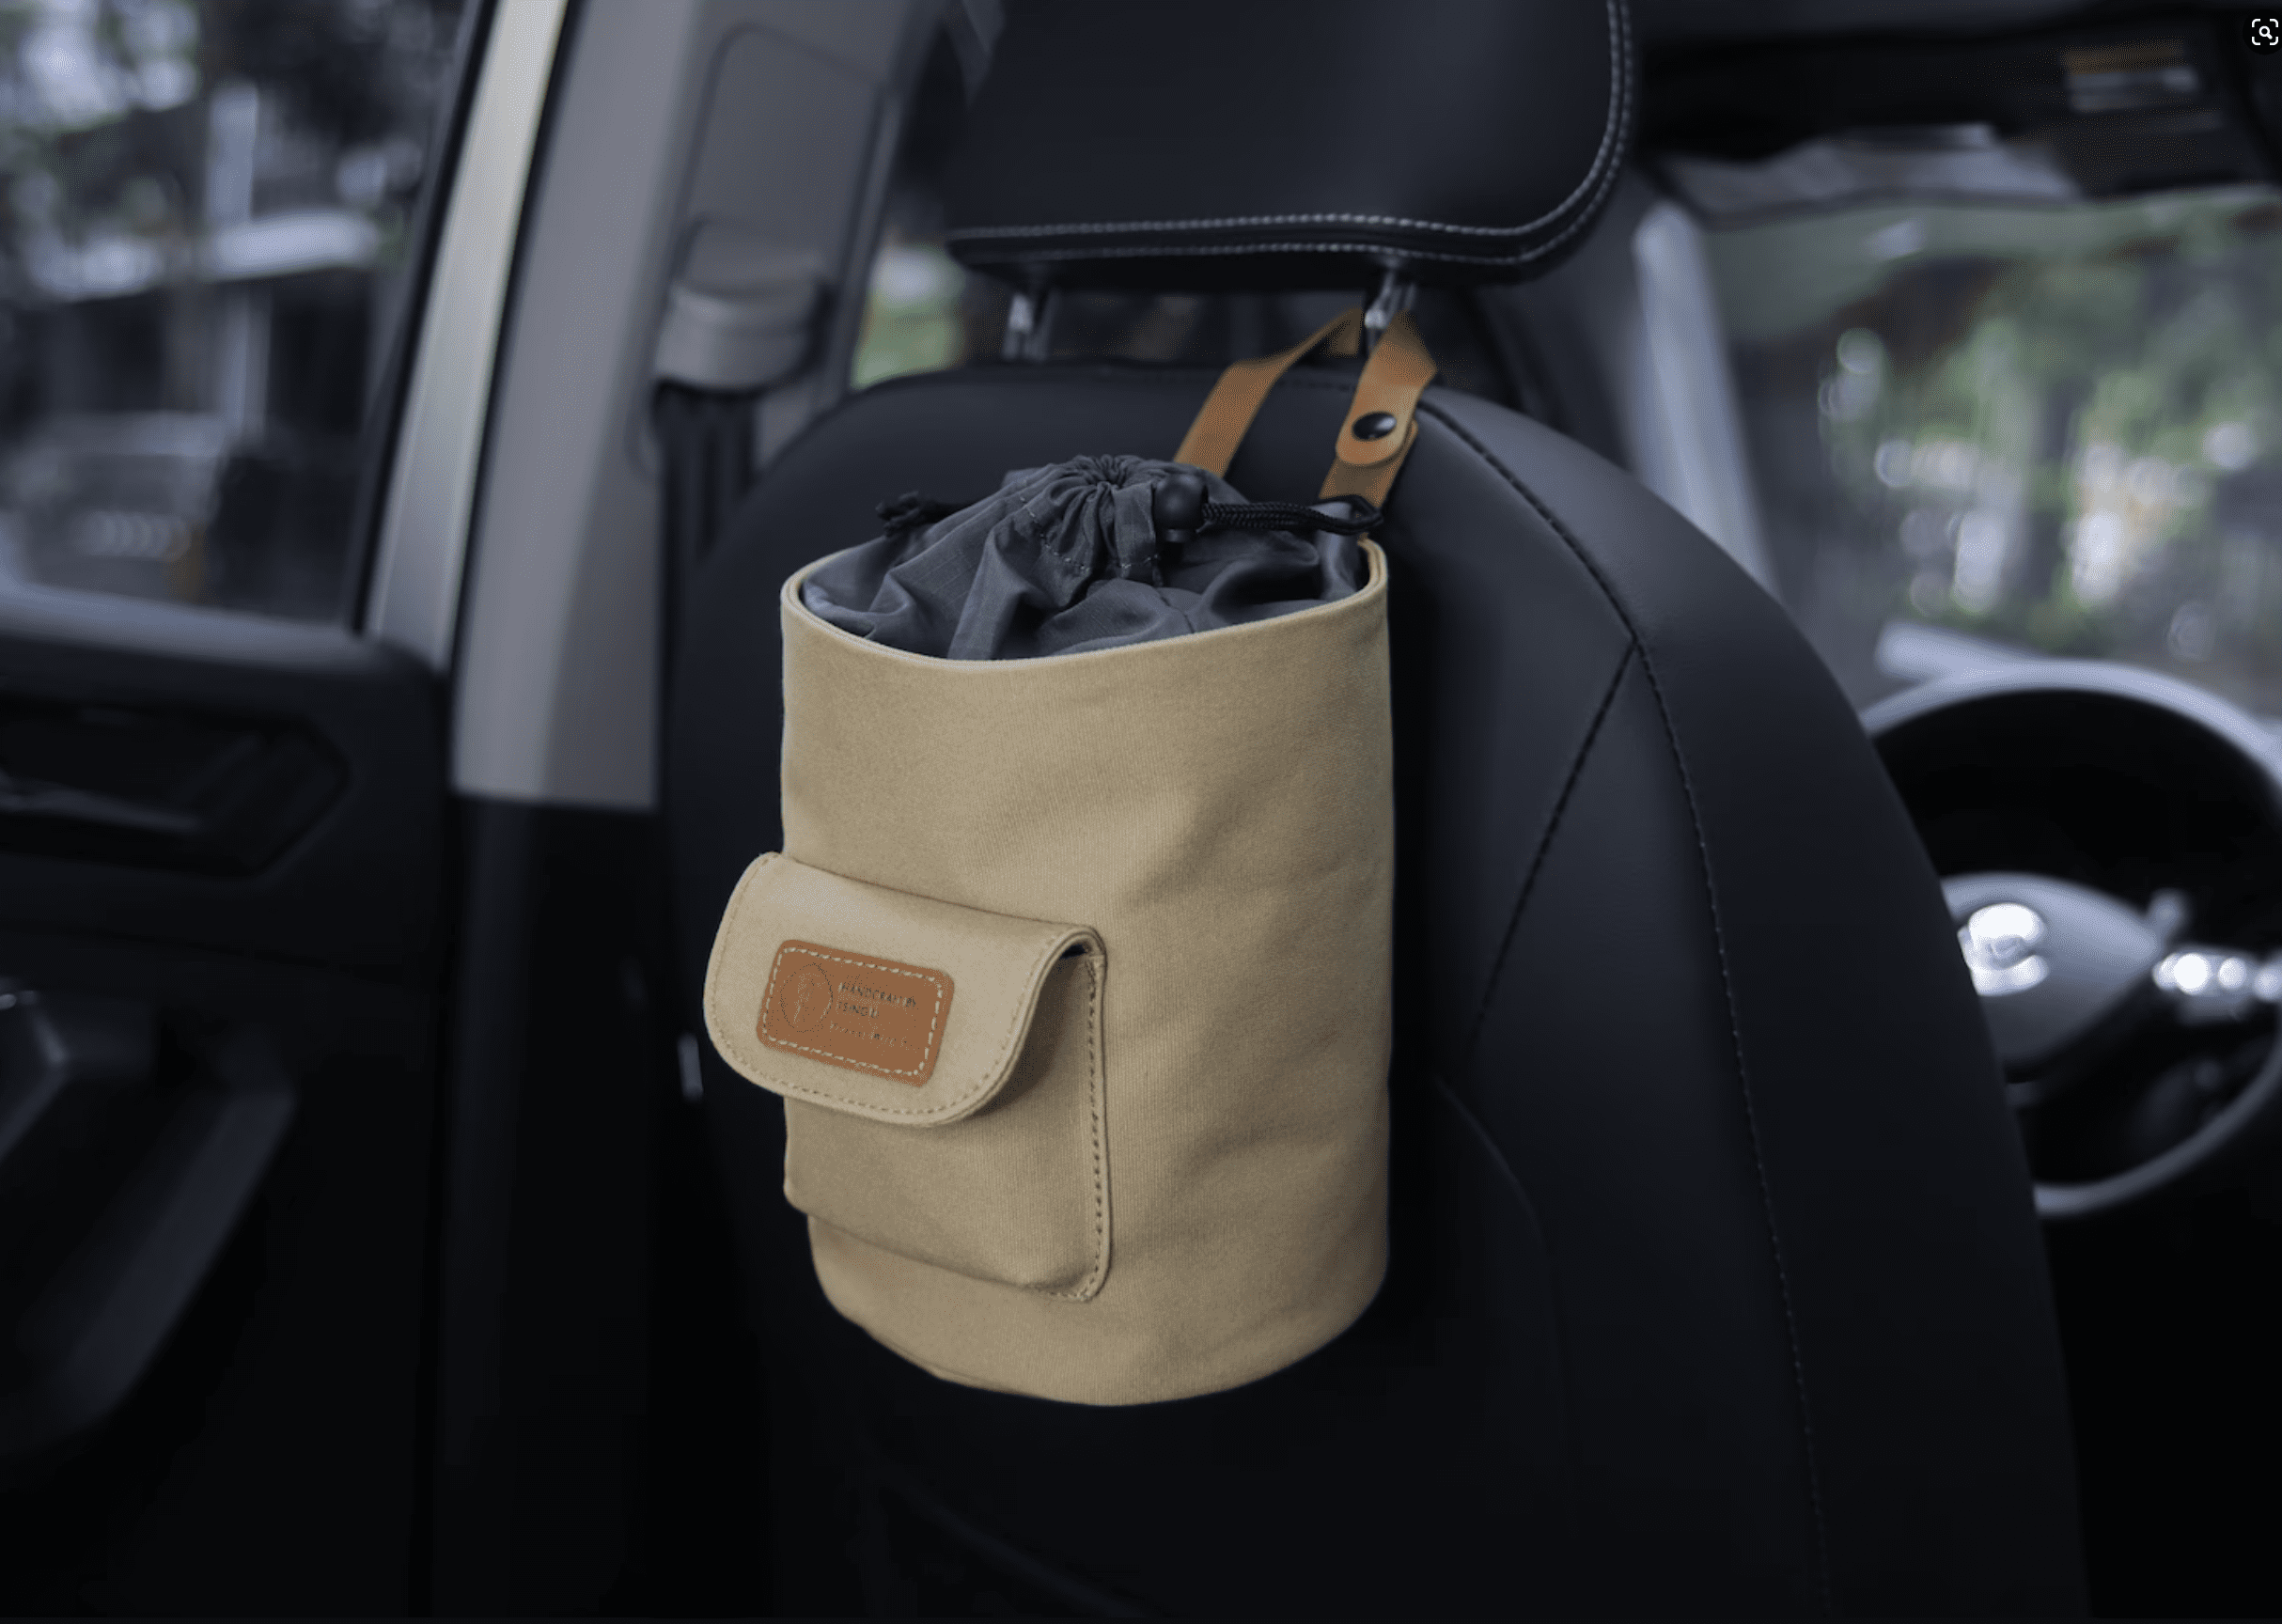 The 10 Smart Car Organizers To Keep Your Vehicle Clean